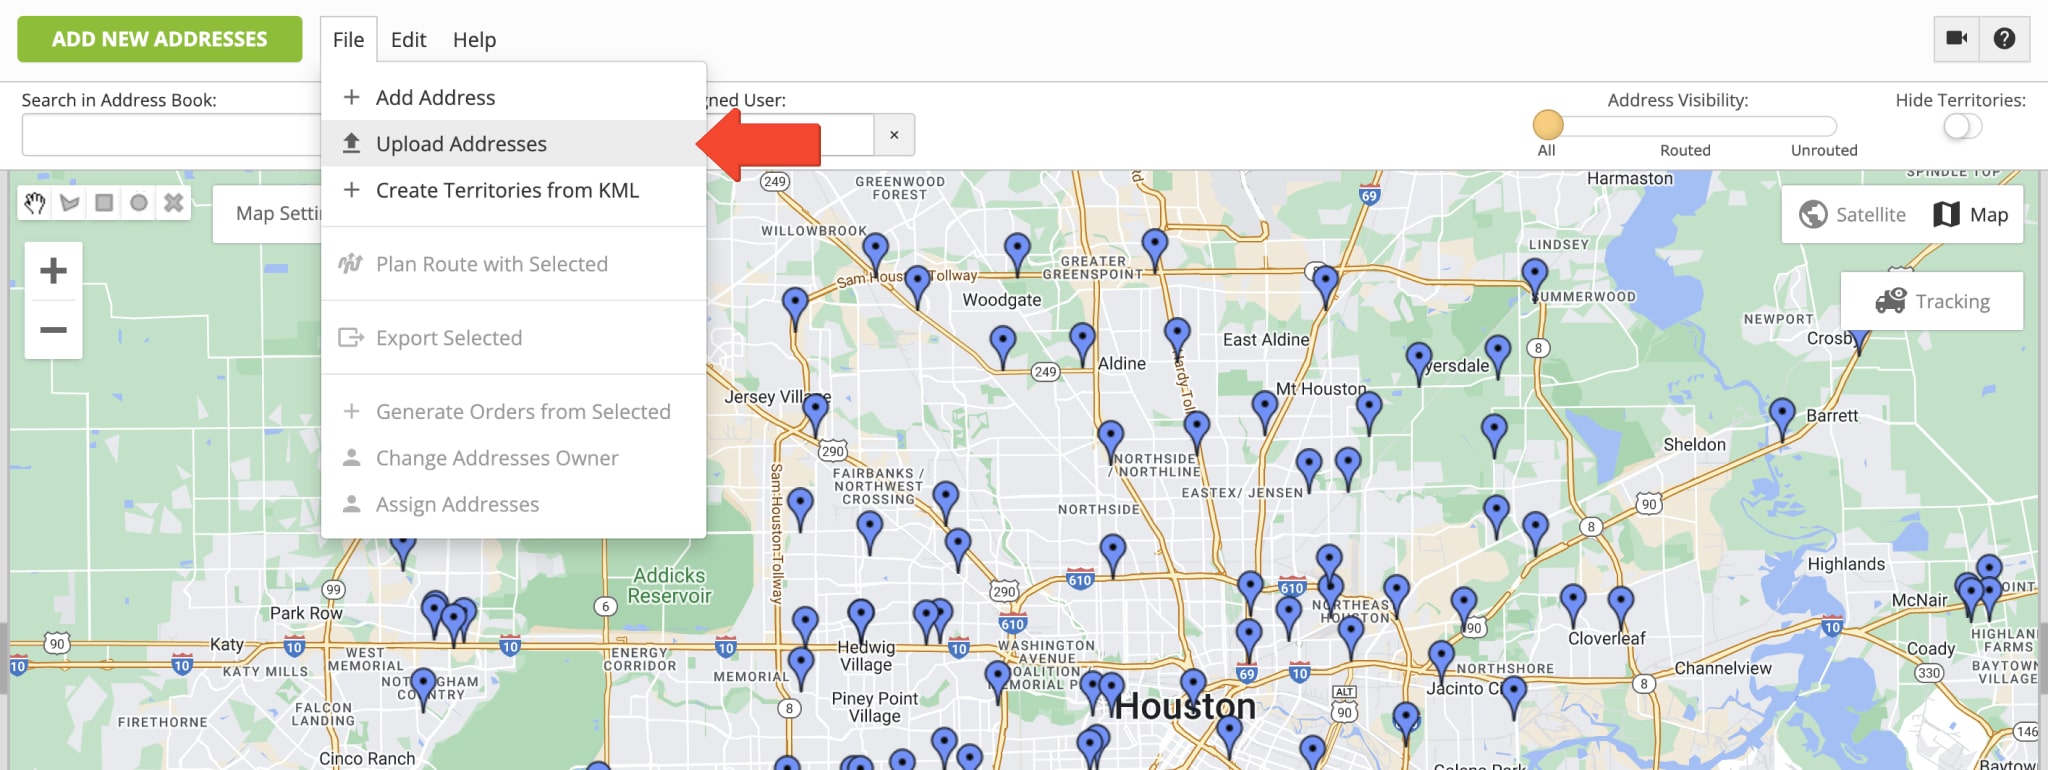 Upload spreadsheets with addresses, orders, and customer information into Route4Me's Synchronized Address Book Map.